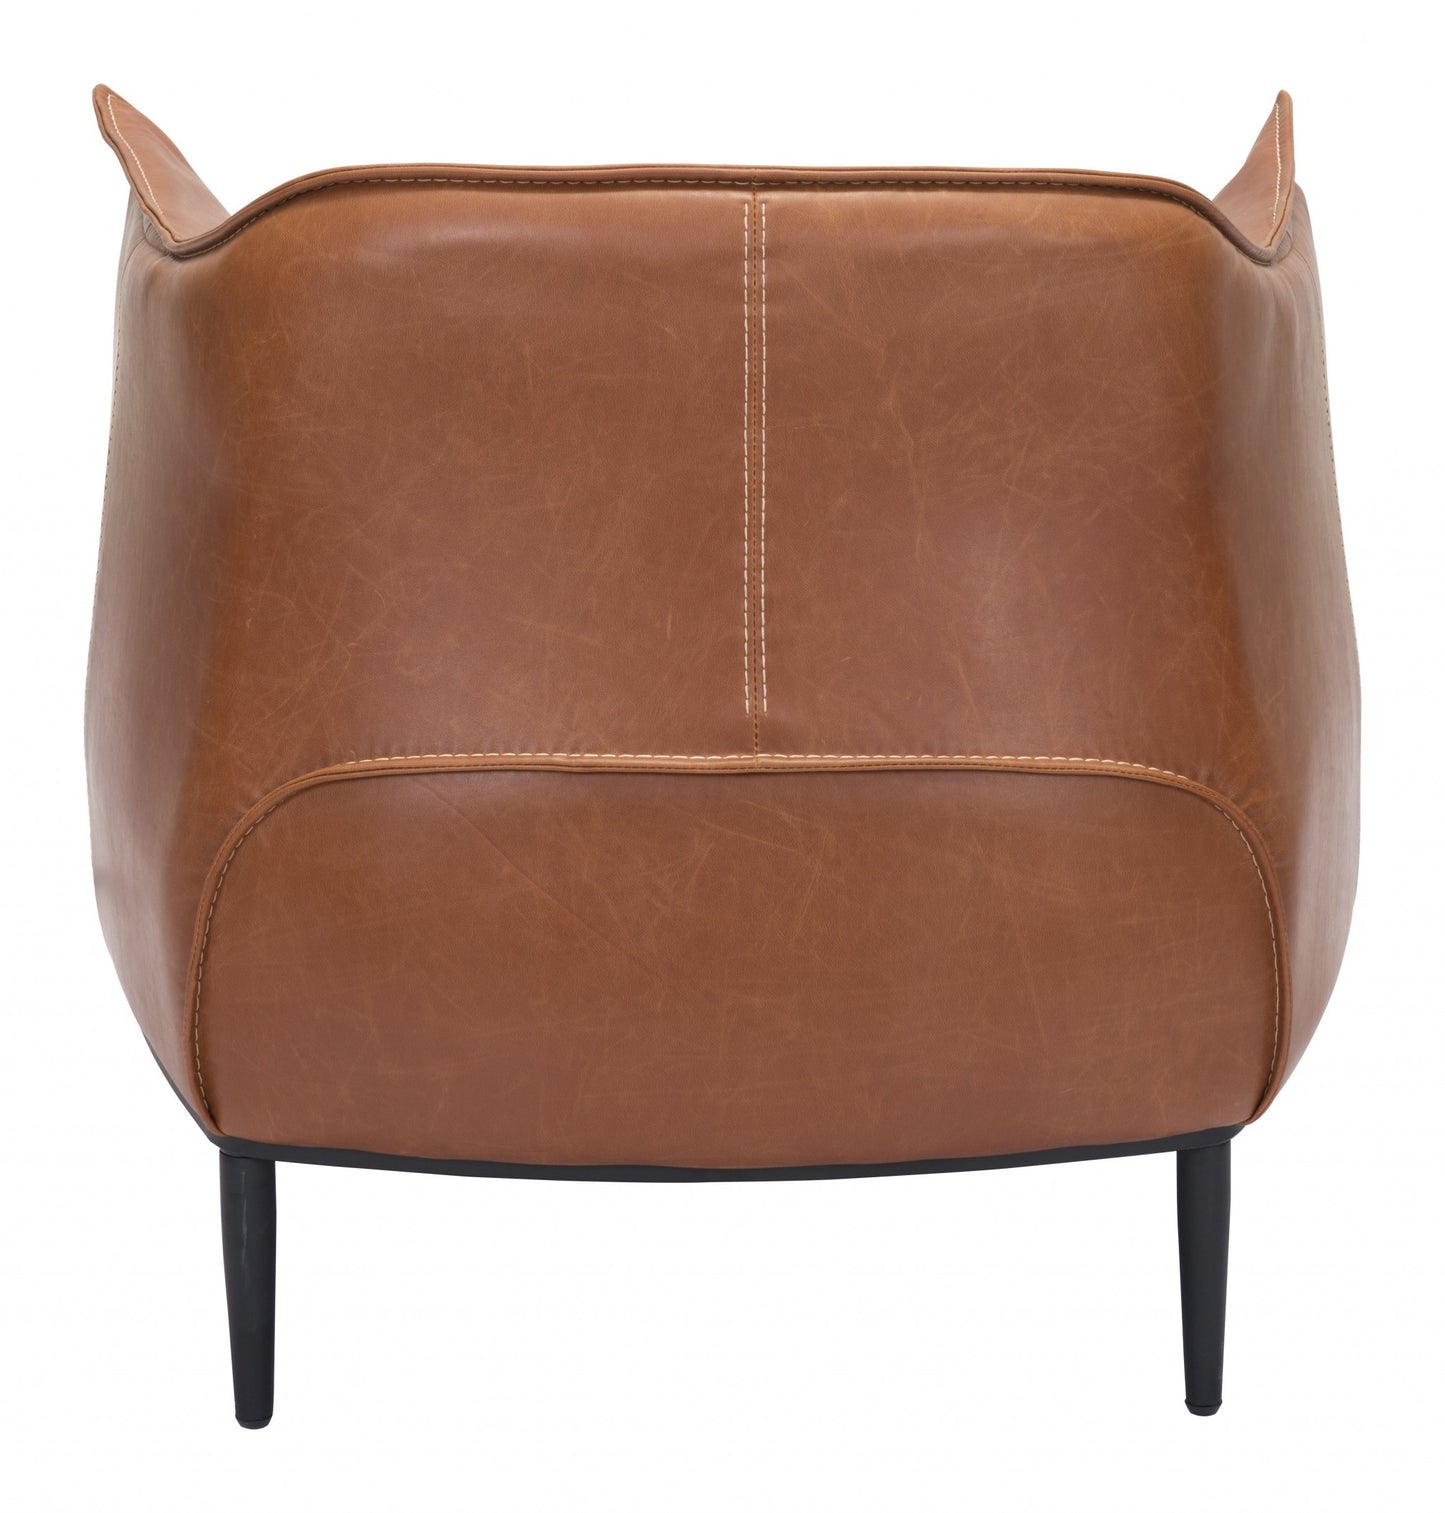 35" Coffee And Brown Faux Leather Barrel Chair By Homeroots